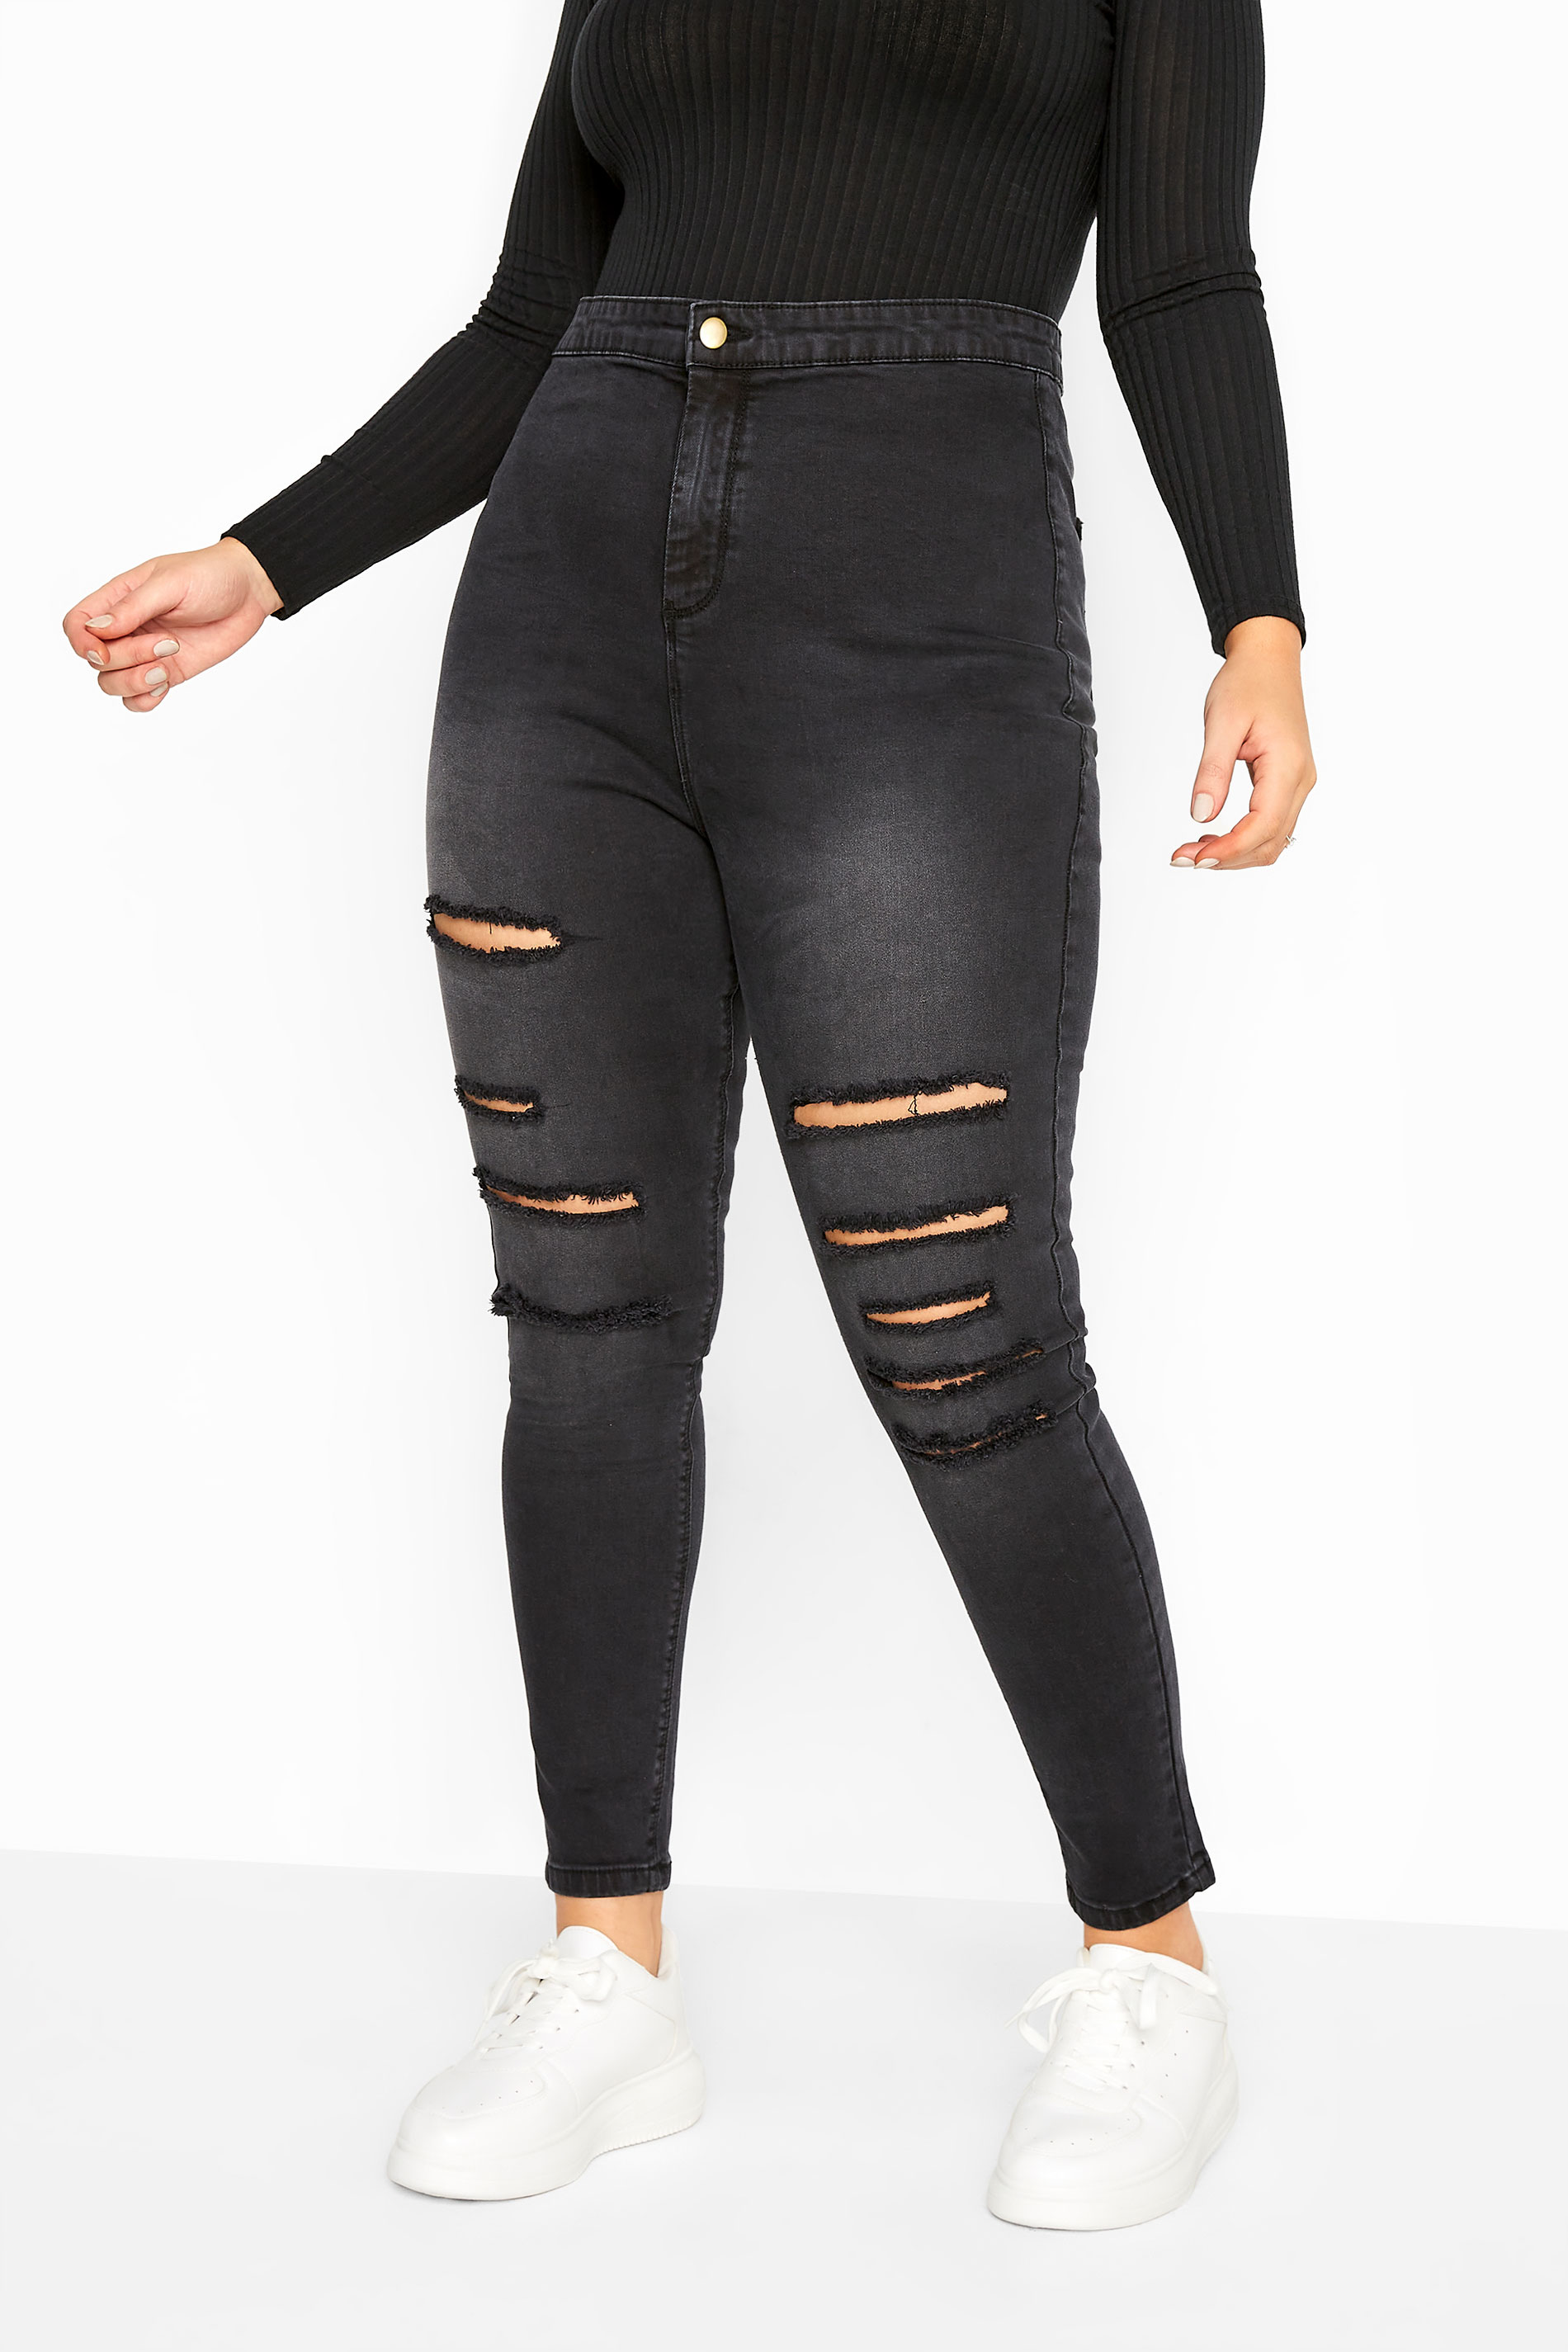 Black Washed Ripped High Rise KIM Skinny Jeans | Yours Clothing